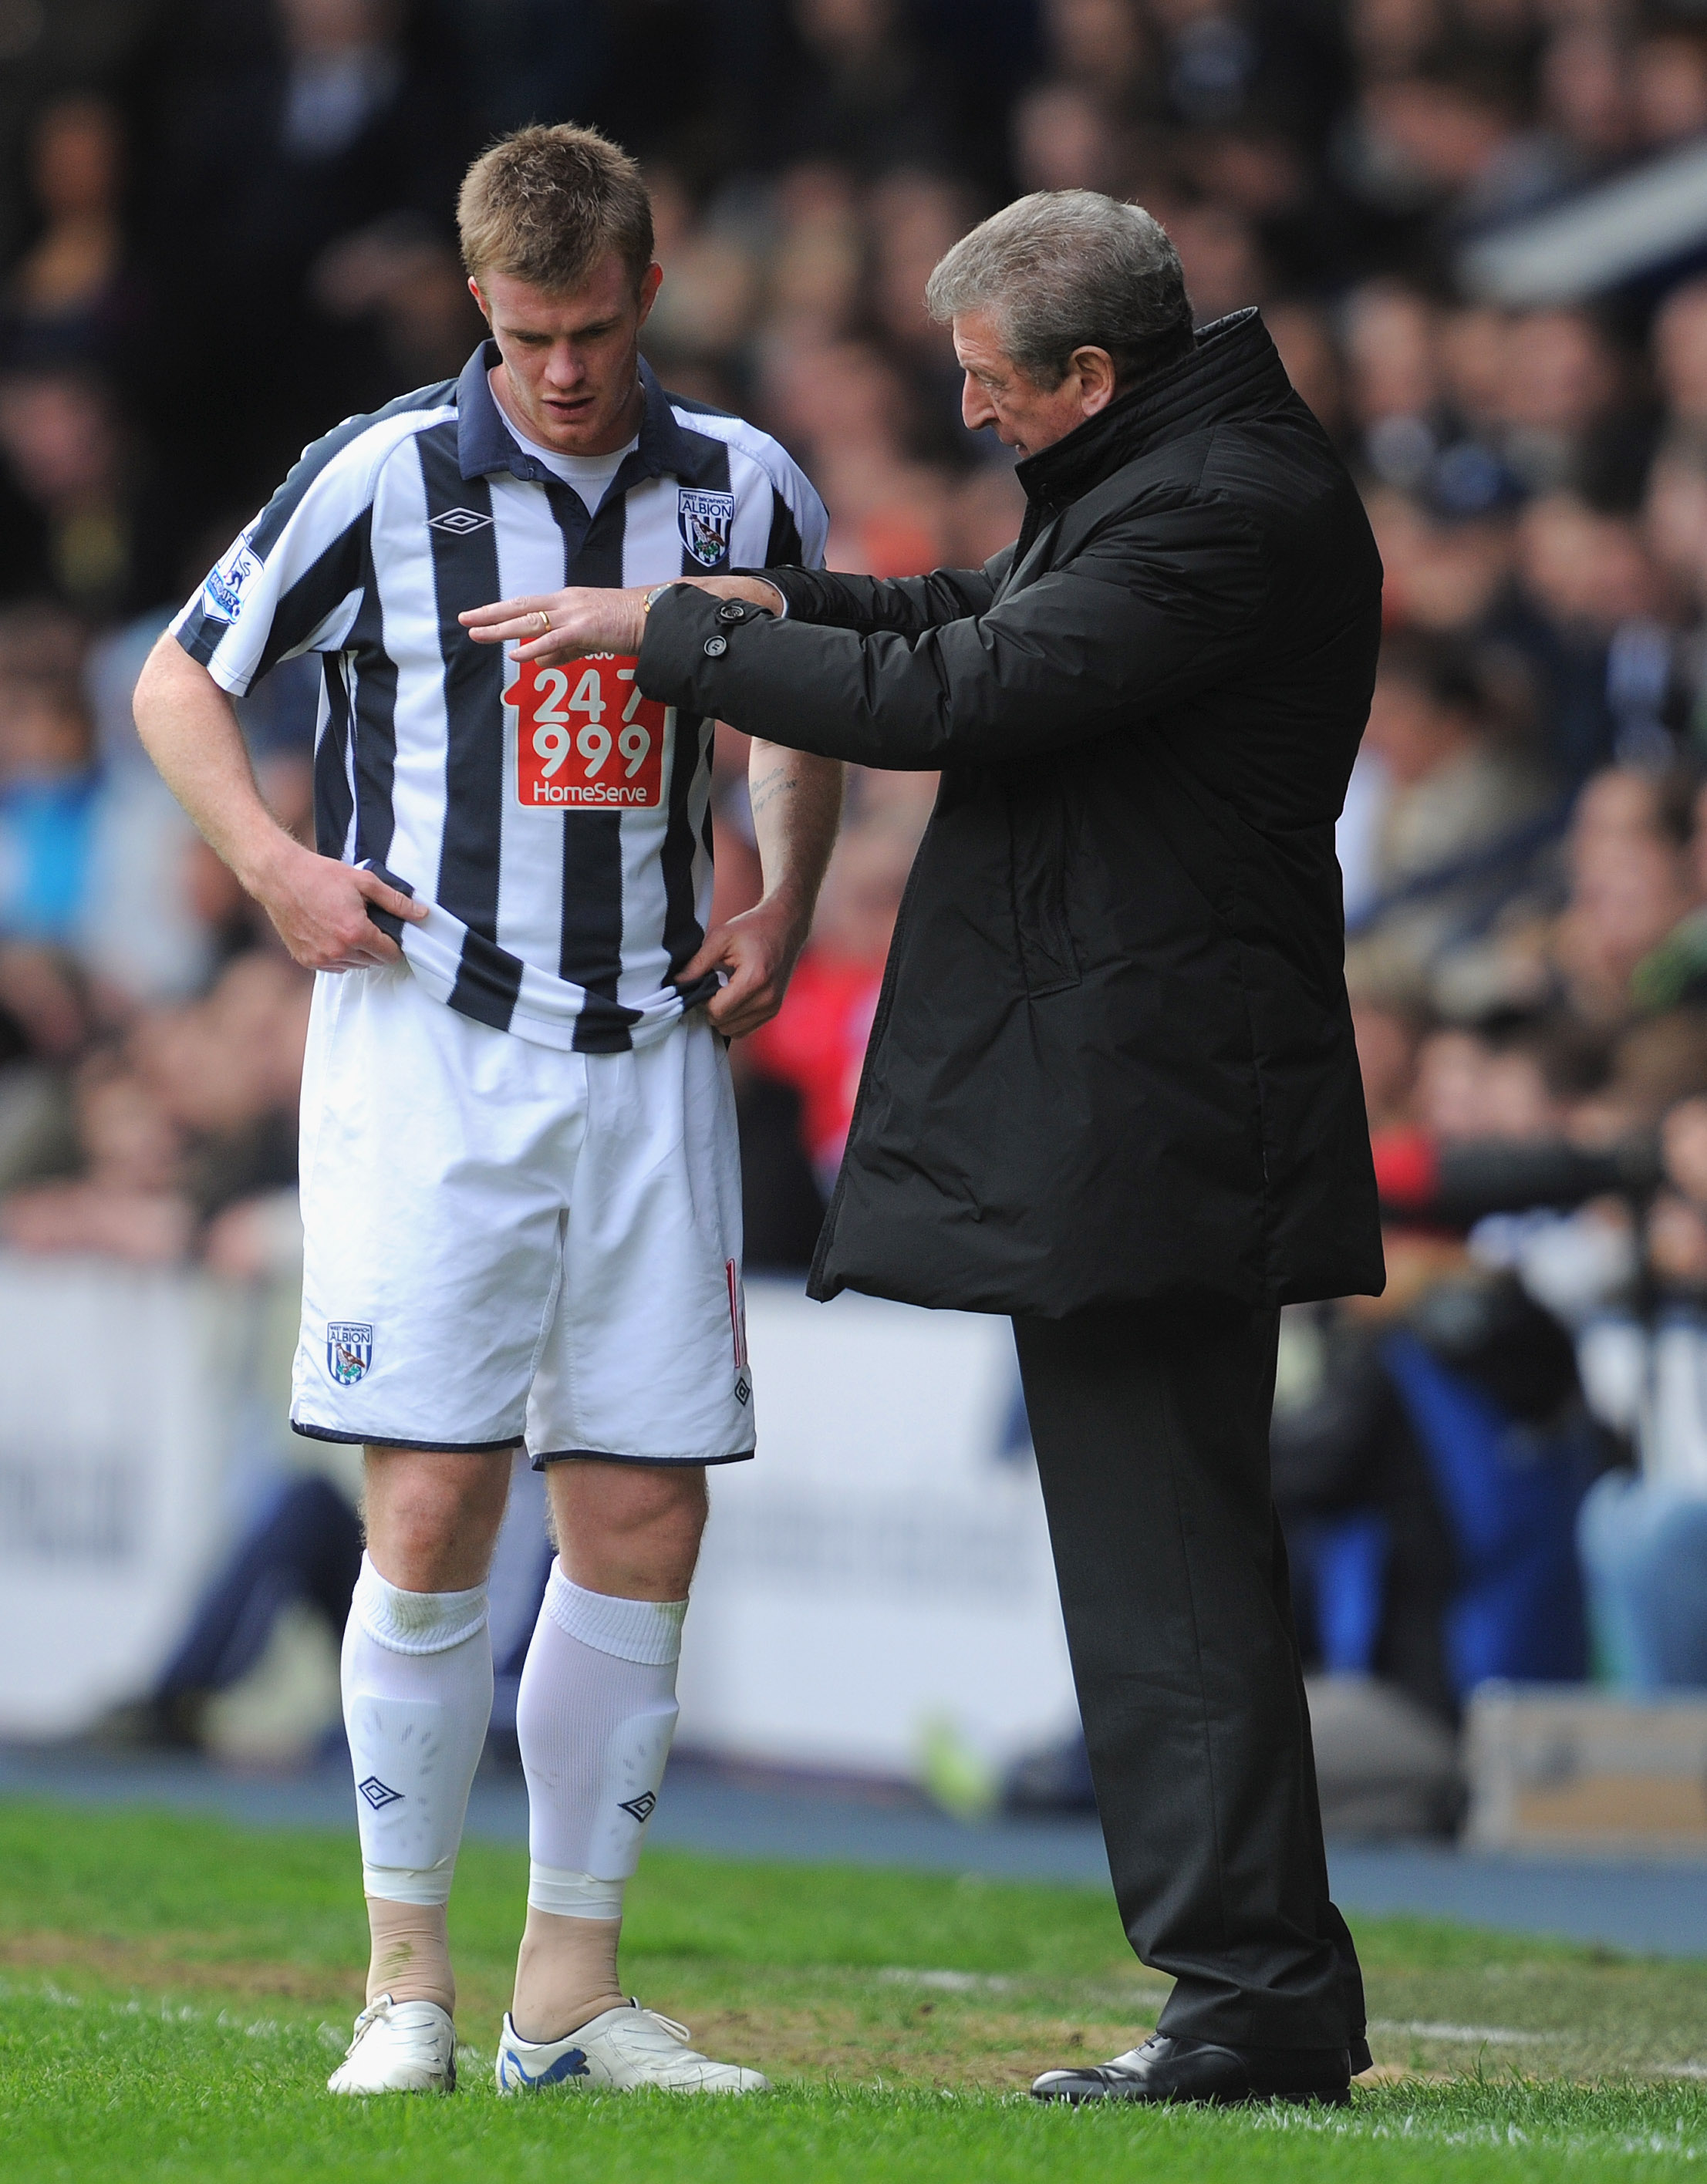 WEST BROMWICH, ENGLAND - APRIL 02: West Brom manager Roy Hodgson speaks to Chris Brunt during the Barclays Premier League match between West Bromwich Albion and Liverpool at The Hawthorns on April 2, 2011 in West Bromwich, England.  (Photo by Michael Rega